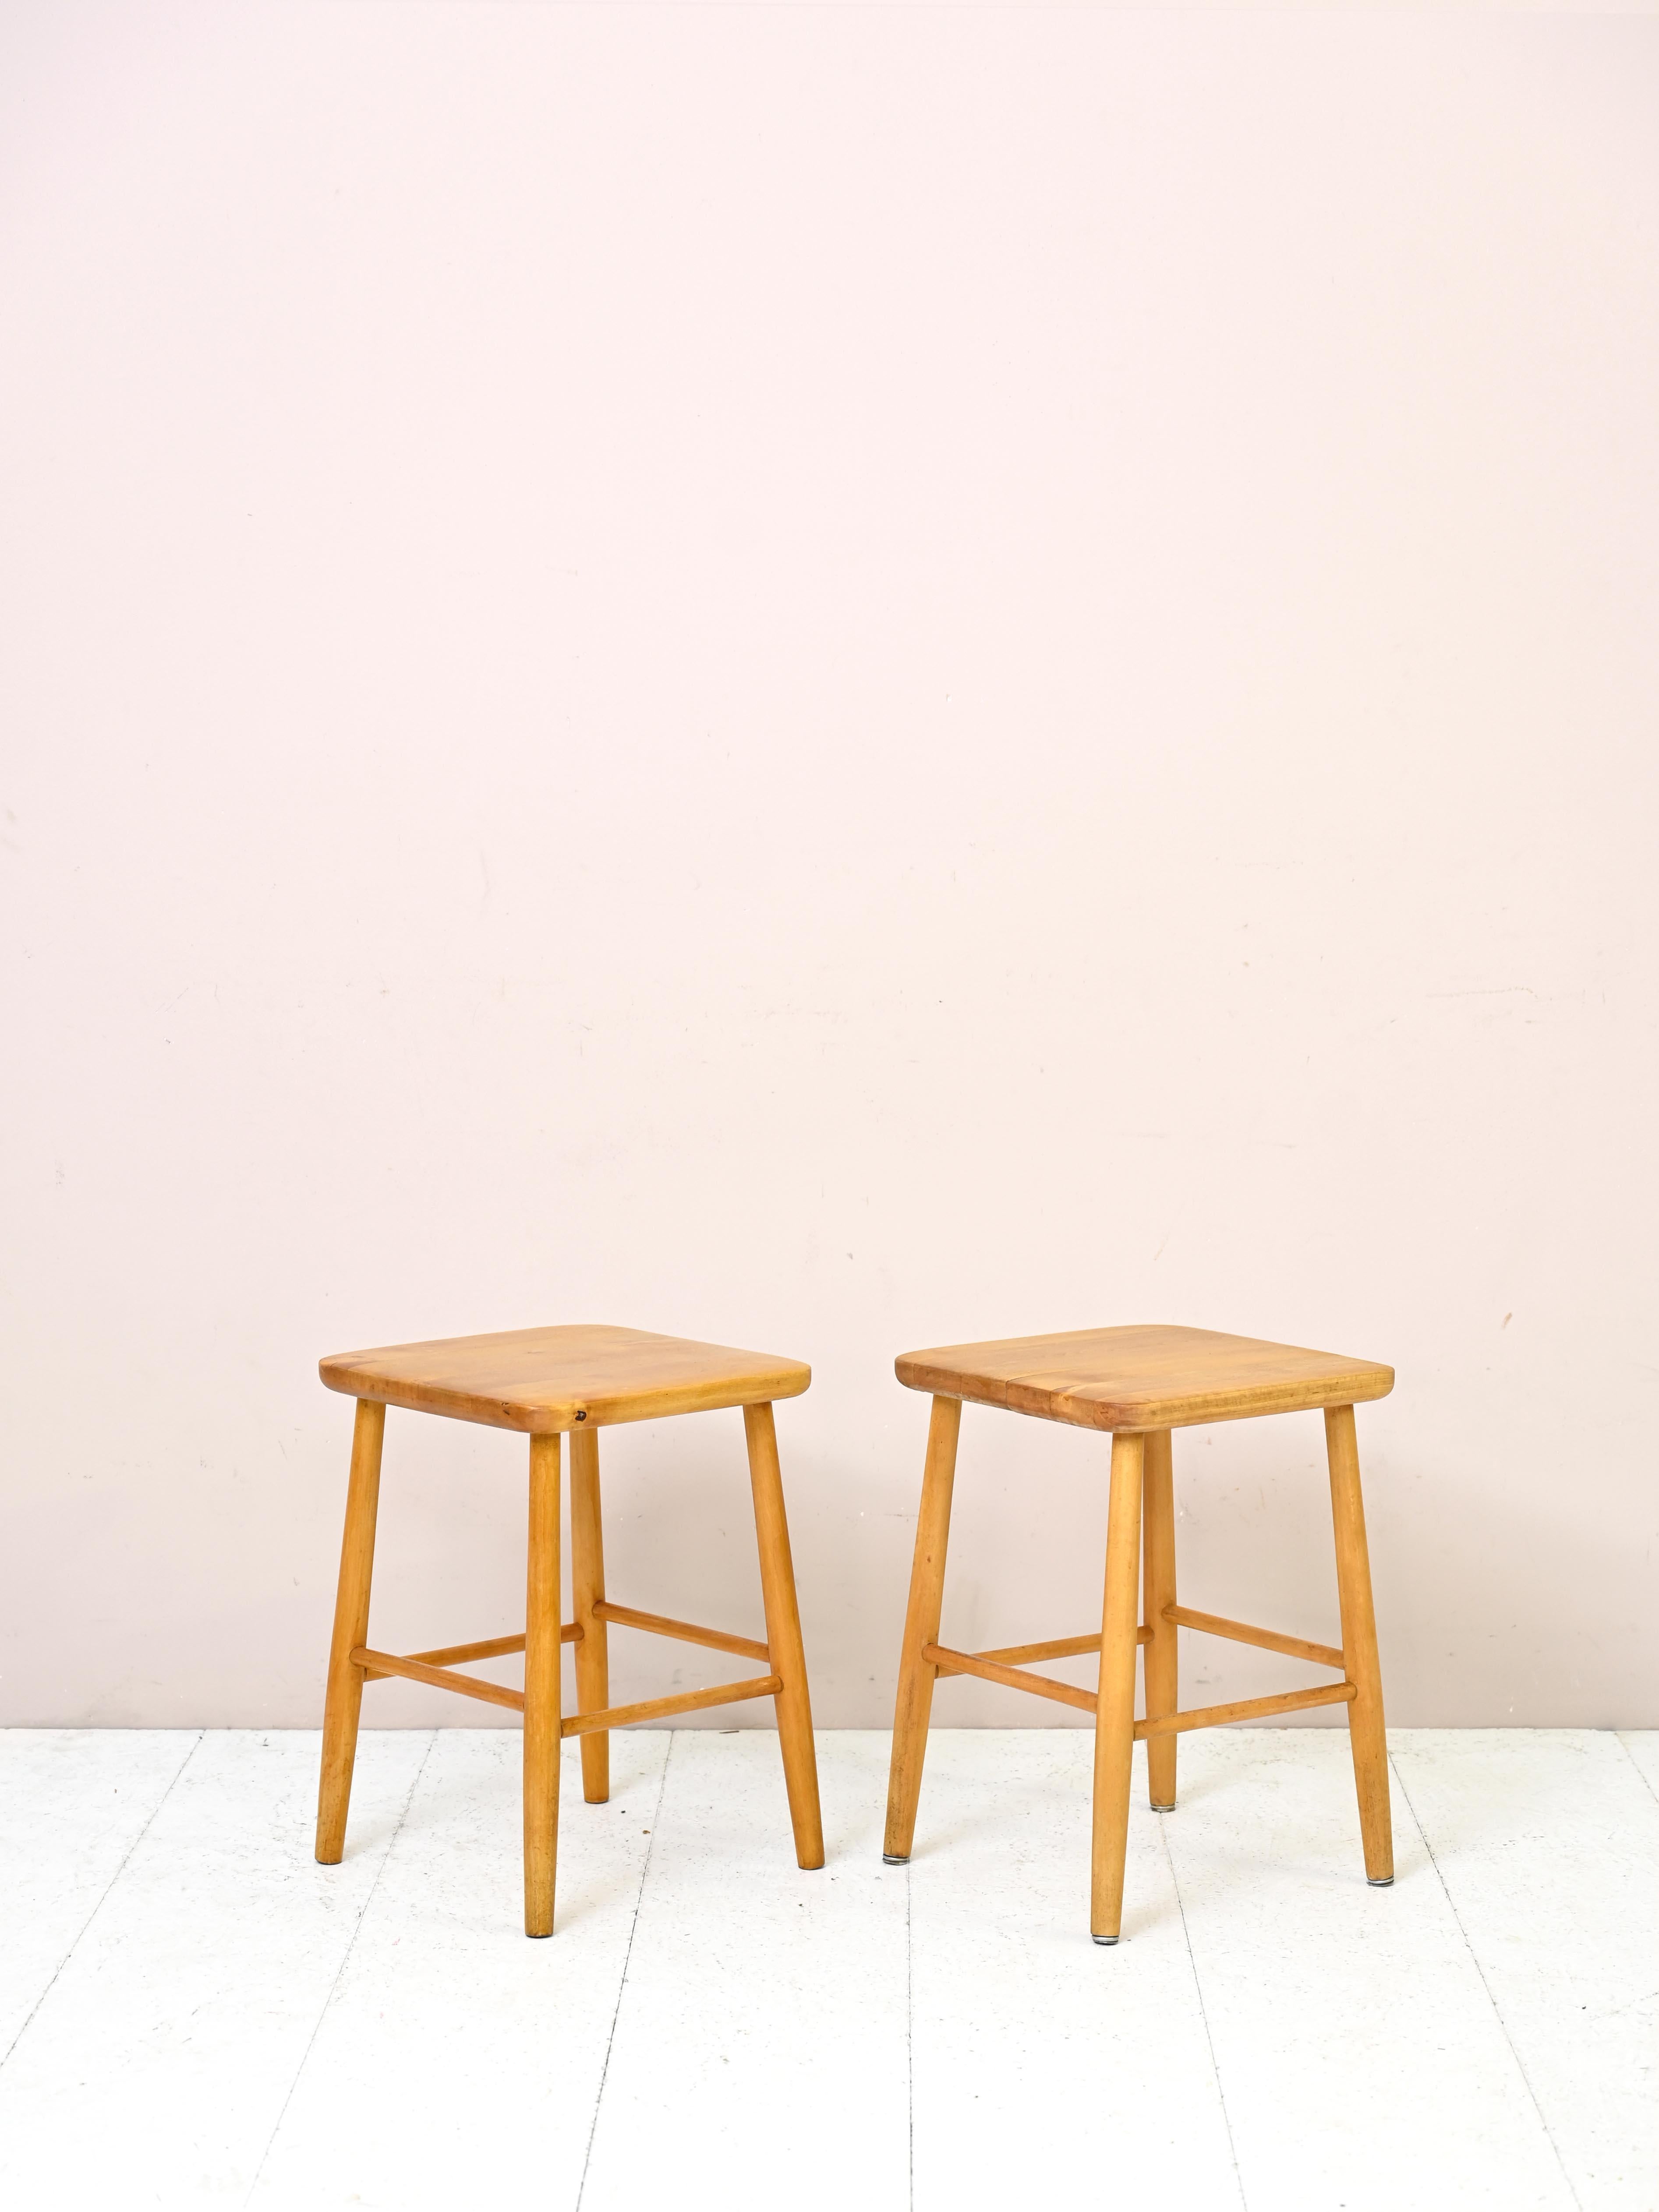 Small vintage birch stools from the 1960s.

This pair of vintage seats traces the style of the classic Nordic 